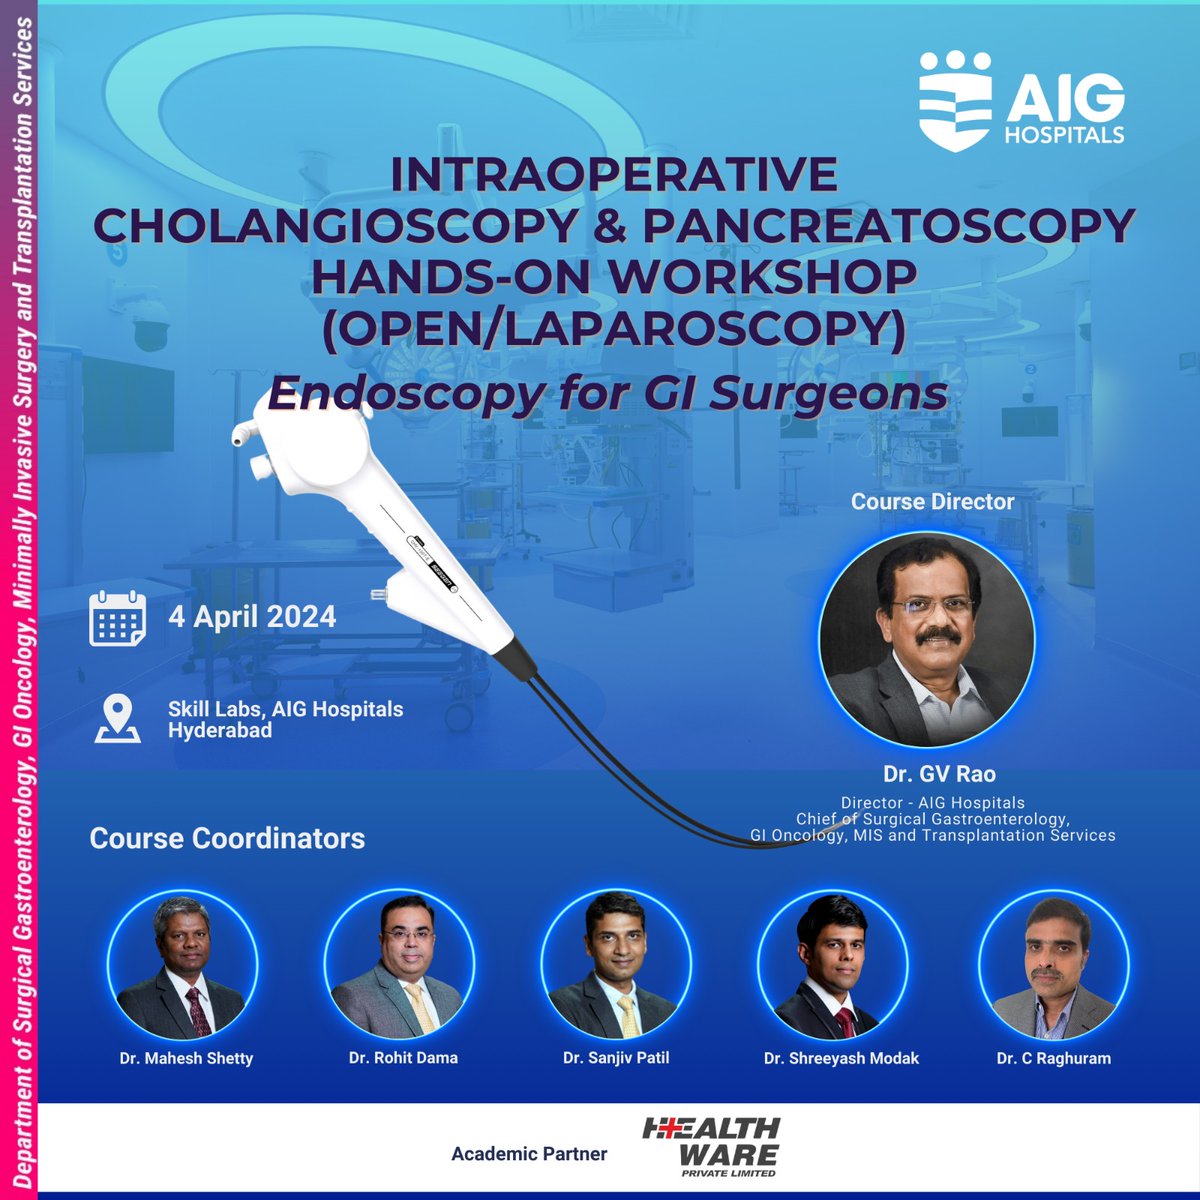 Hands-on course for #GISurgeons on Intra Operative #Cholangioscopy and #Pancreatoscopy using high resolution ultrathin digital endoscopes. This cutting edge technology can be used both as a diagnostic and therapeutic tool improving surgical outcomes.#GISurgery #HPB #AIGHospitals